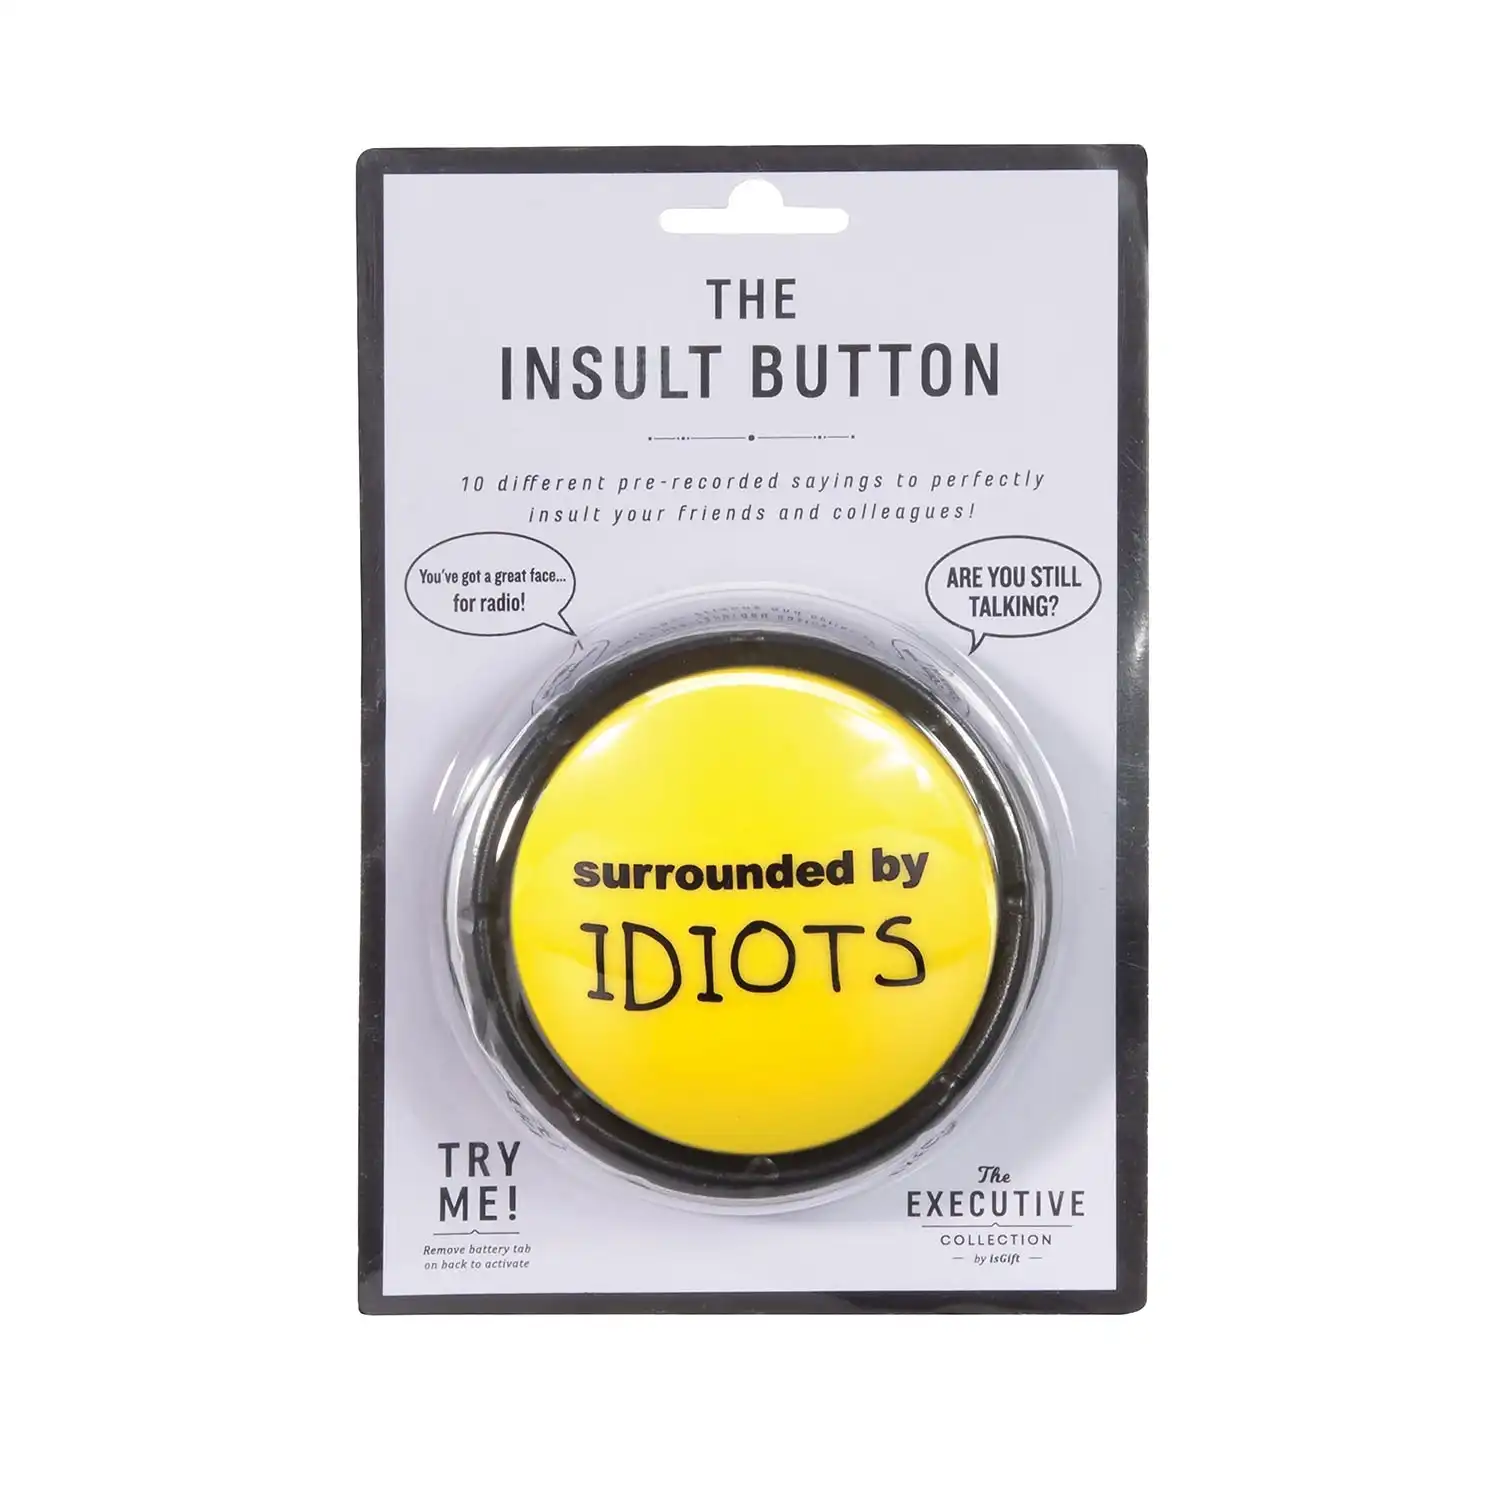 The Insult Button